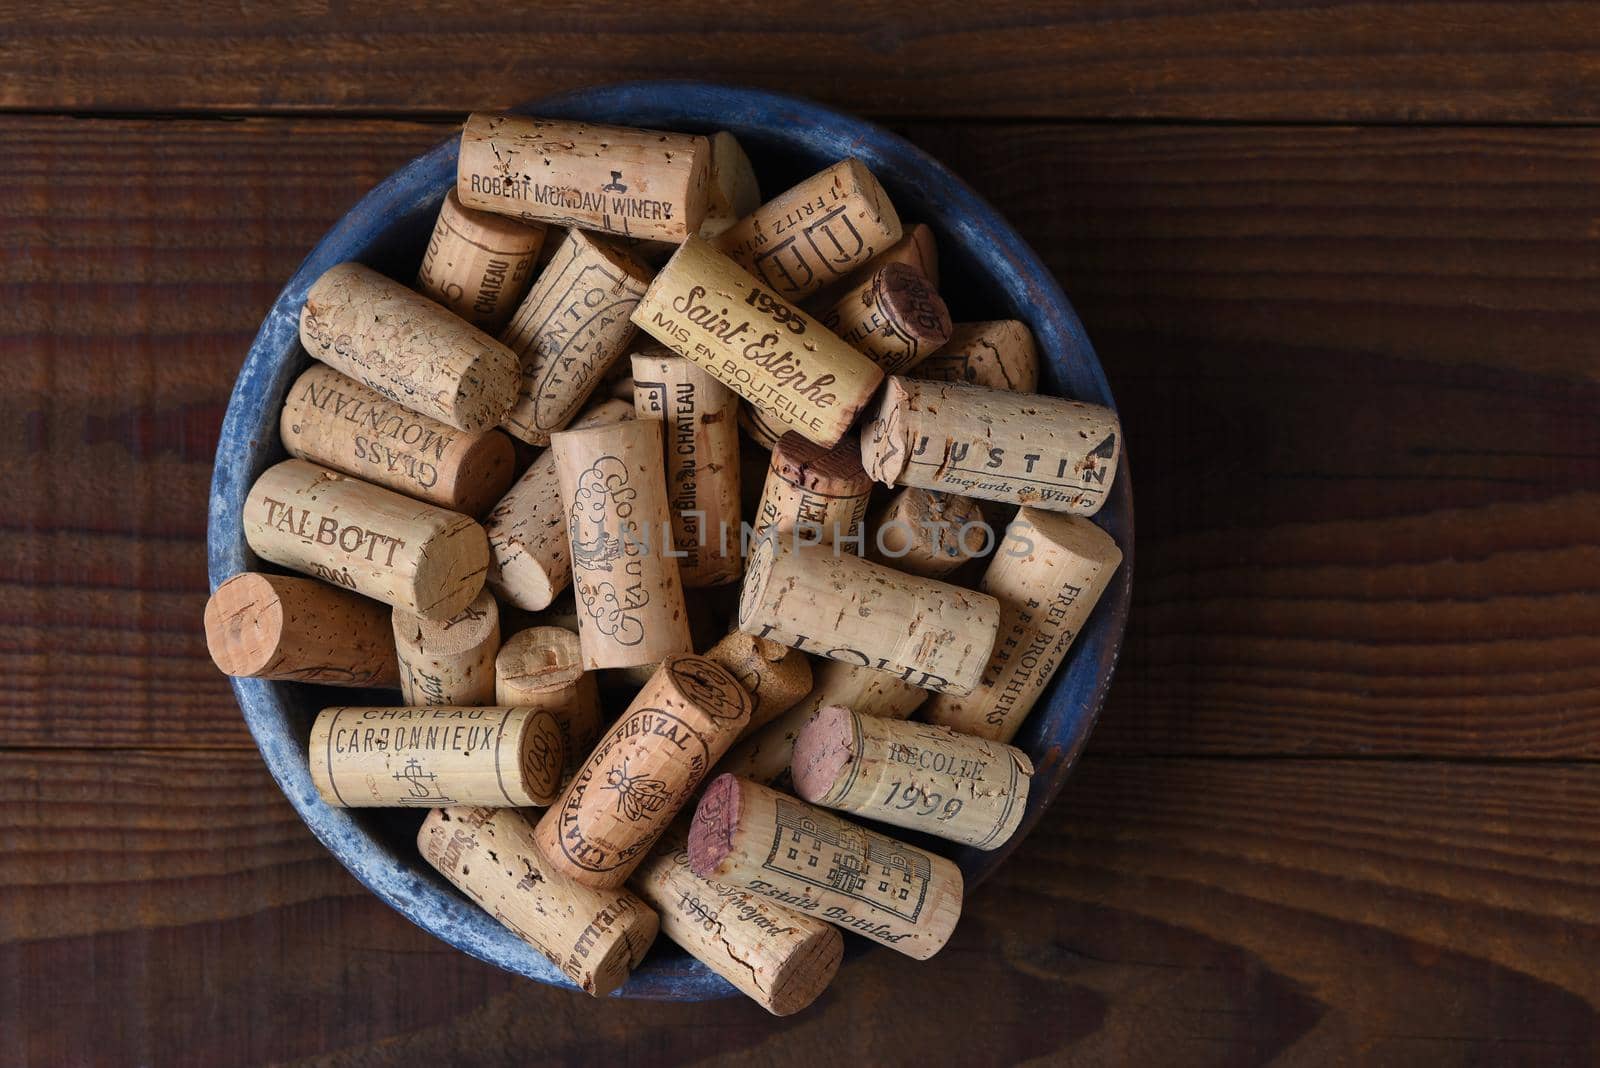 IRIVNE, CALIFORNIA - 26 JAN 2020: A group of branded wine corks in a bowl from domestic and foreign wineries. by sCukrov